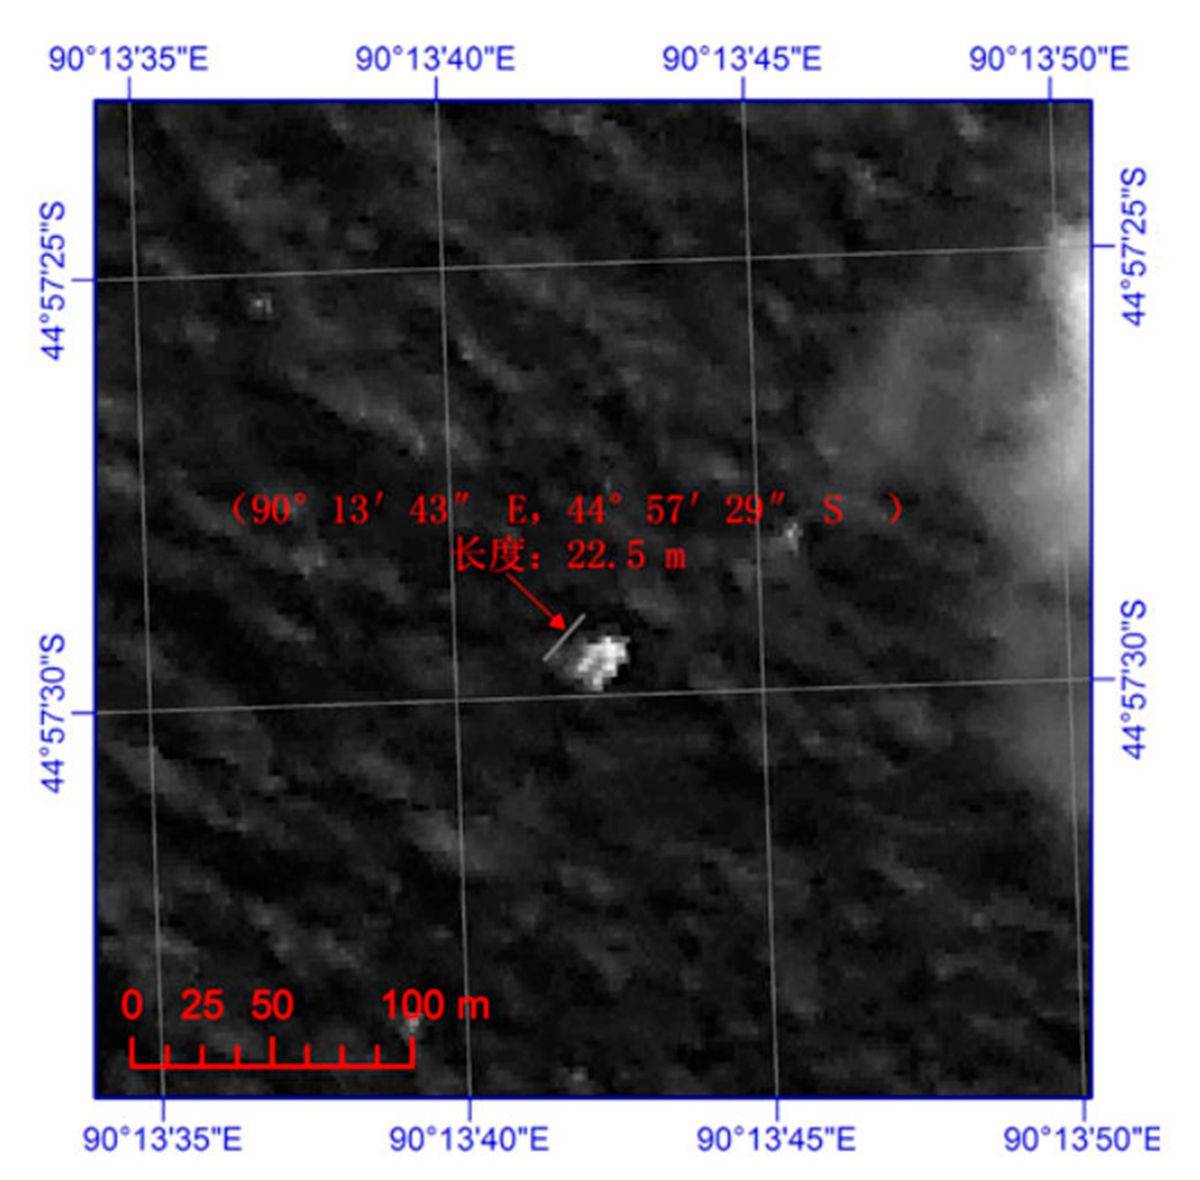 Chinese satellites have spotted the new object in the southern Indian Ocean that could be wreckage from the missing Malaysia Airlines Flight MH370 carrying 239 people, and ships are on their way to investigate.    (Reuters)